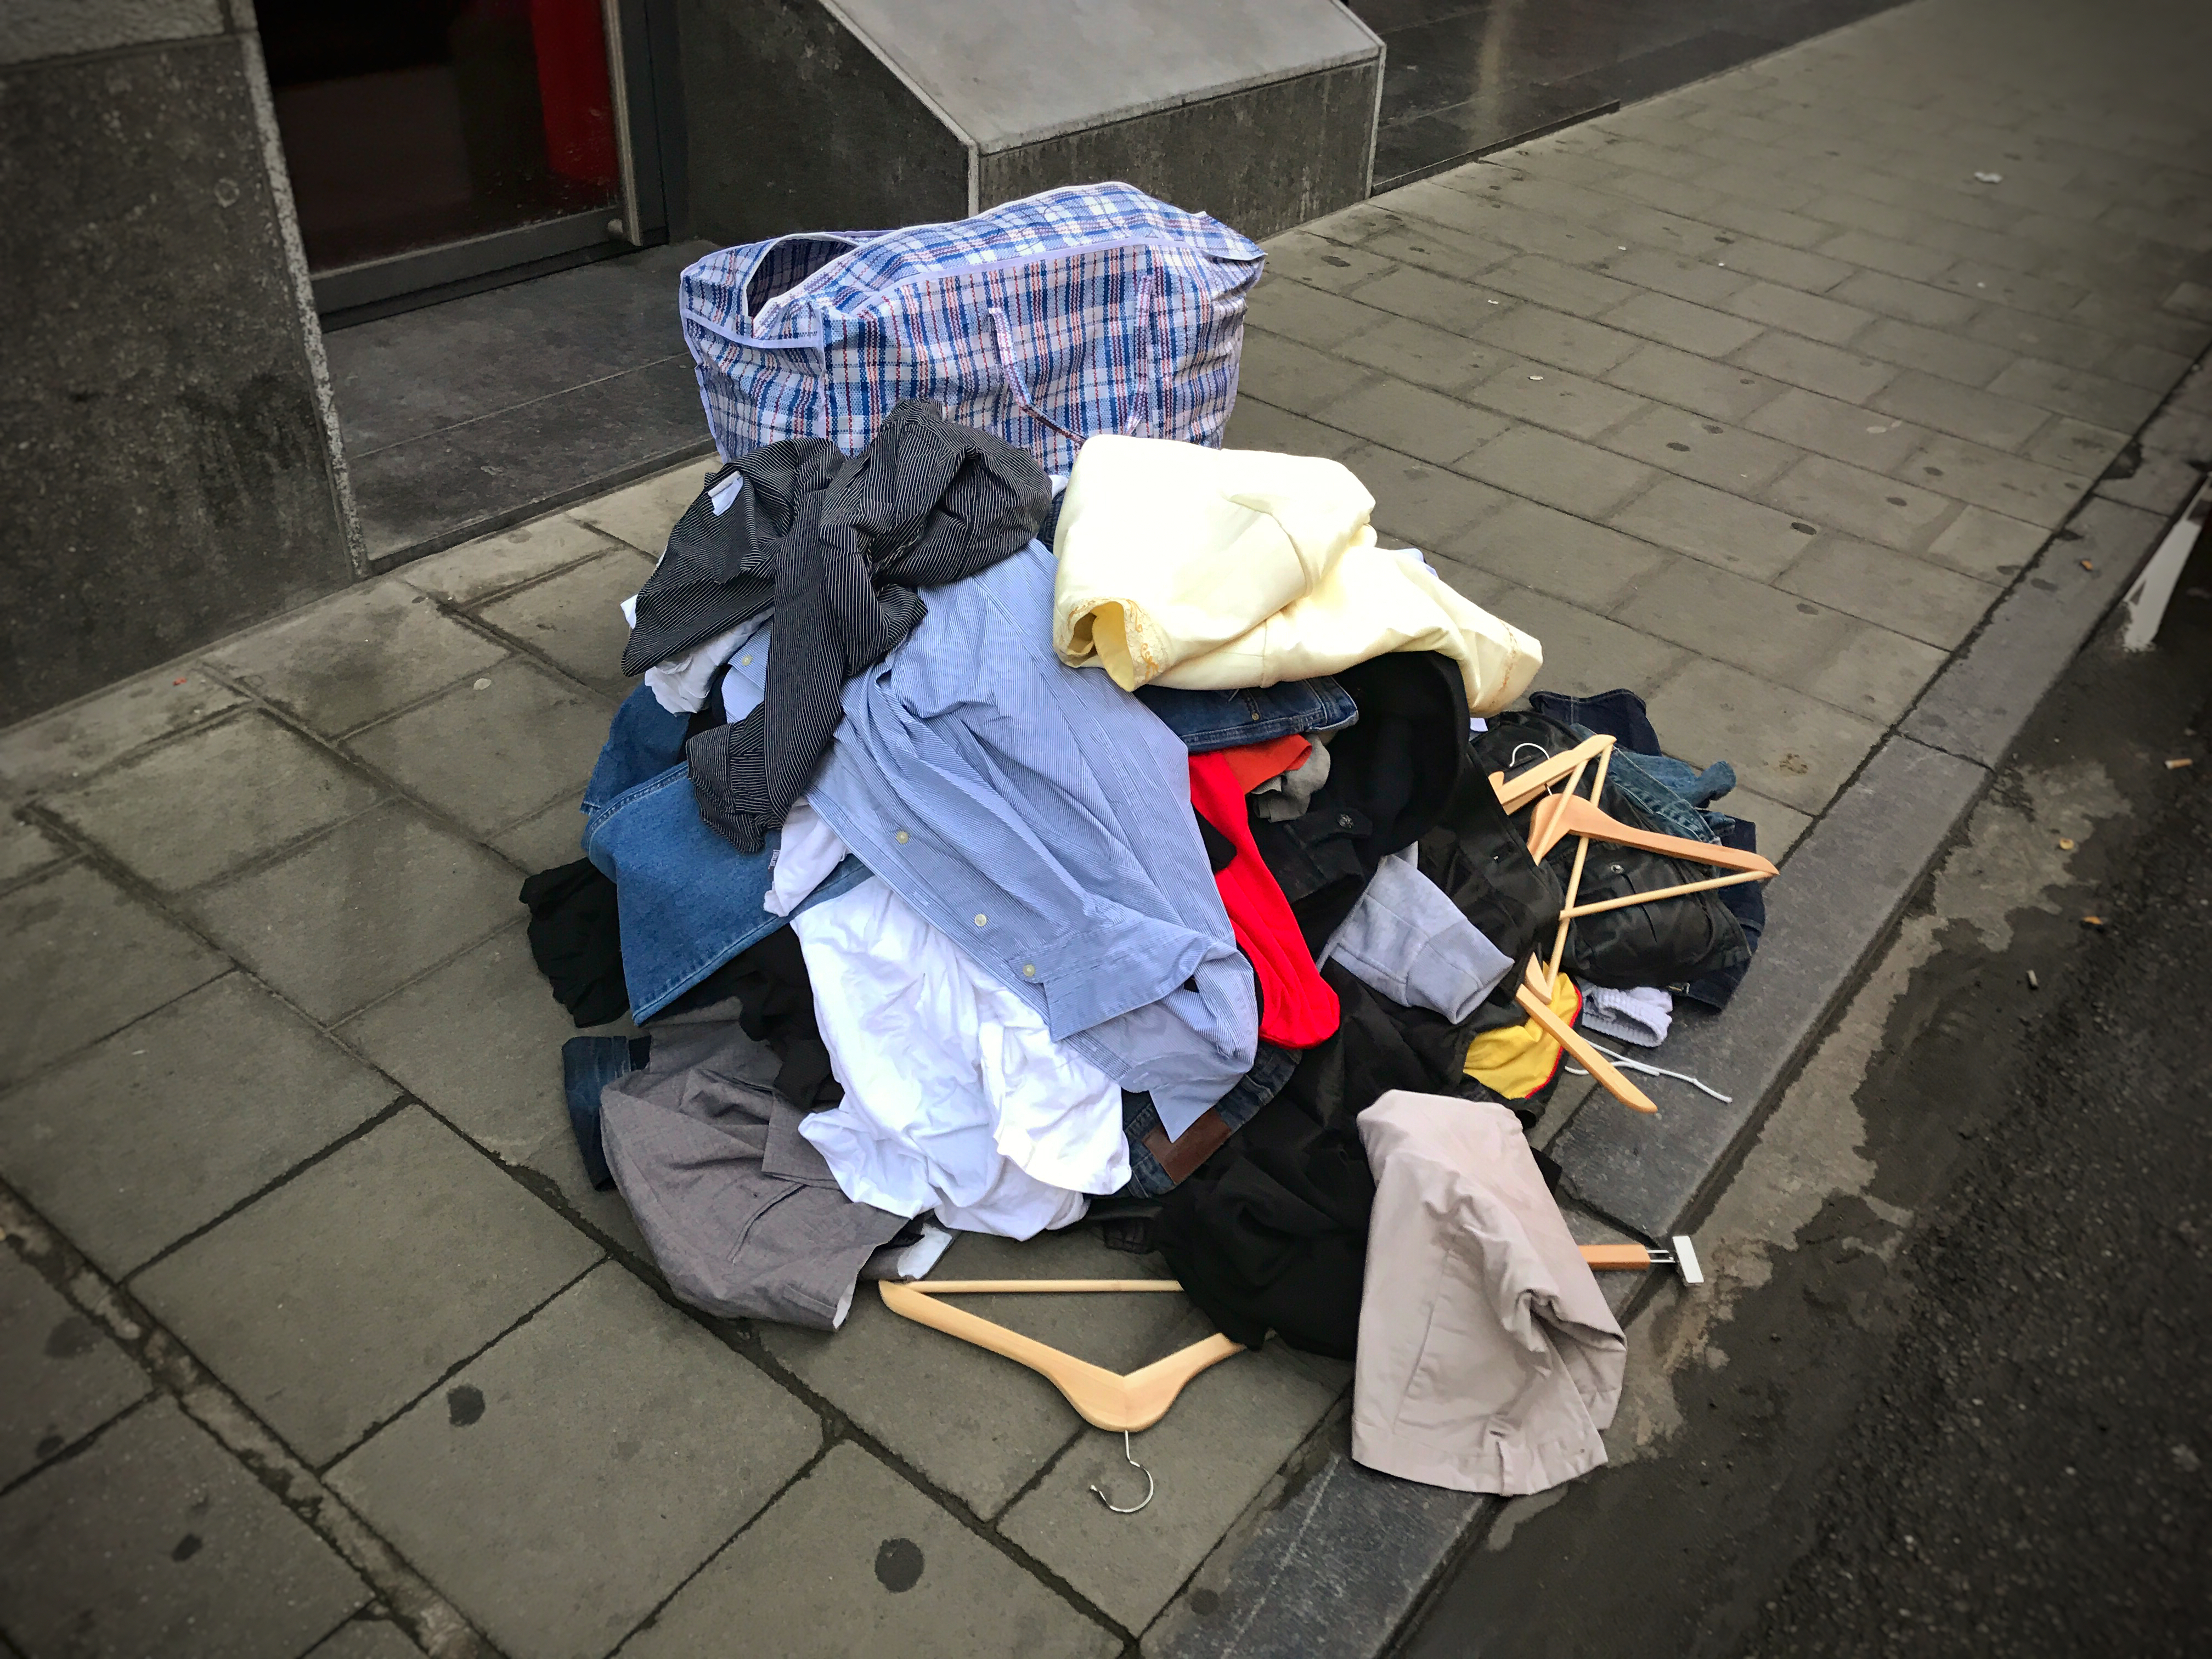 A pile of clothes on the street | Source: Shutterstock